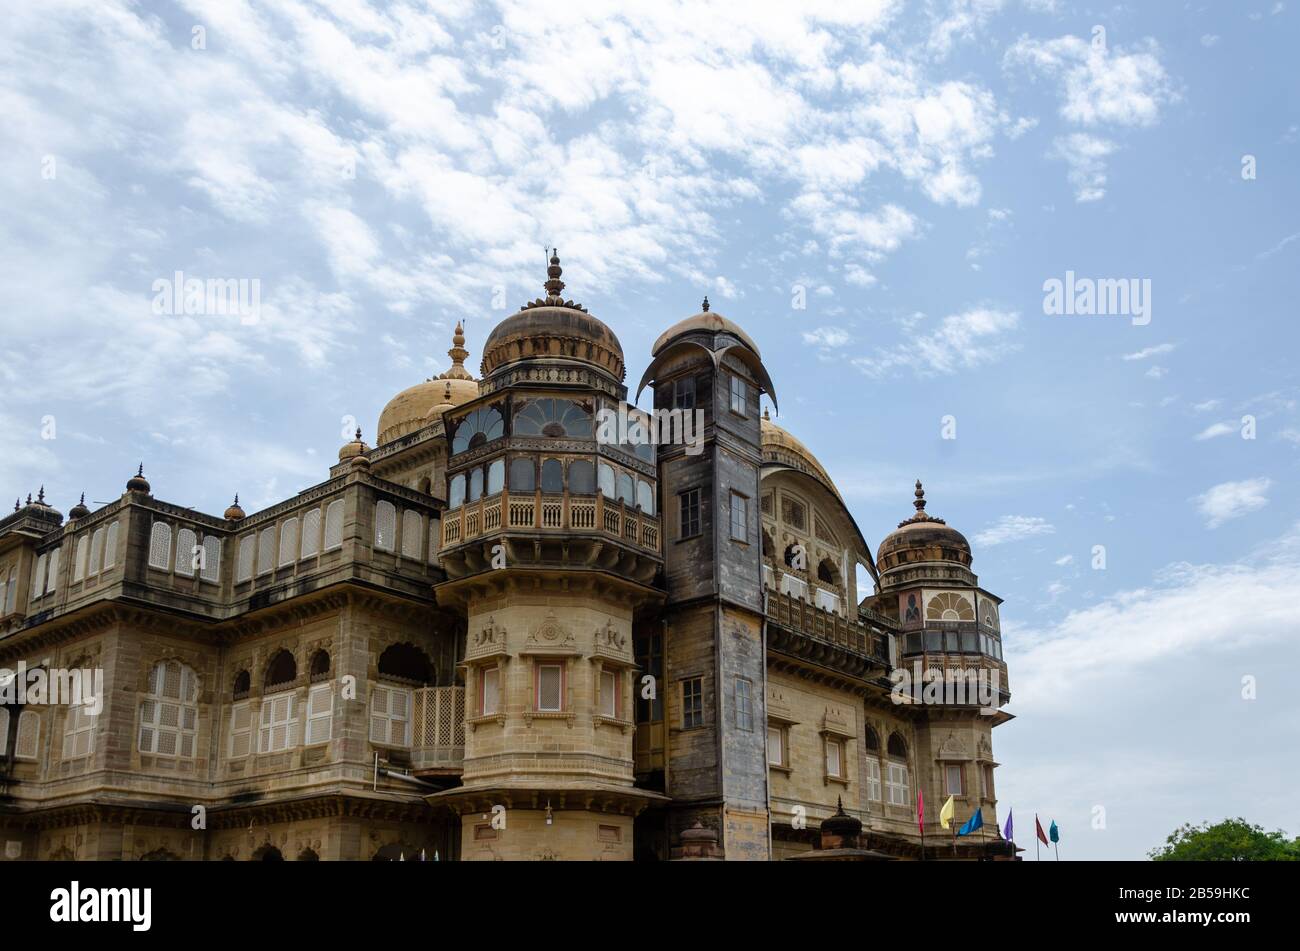 Exquisitely stone-carved roof domes and other elements of Vijaya Vilas Palace, Mandvi, Kutch, Gujarat, India Stock Photo